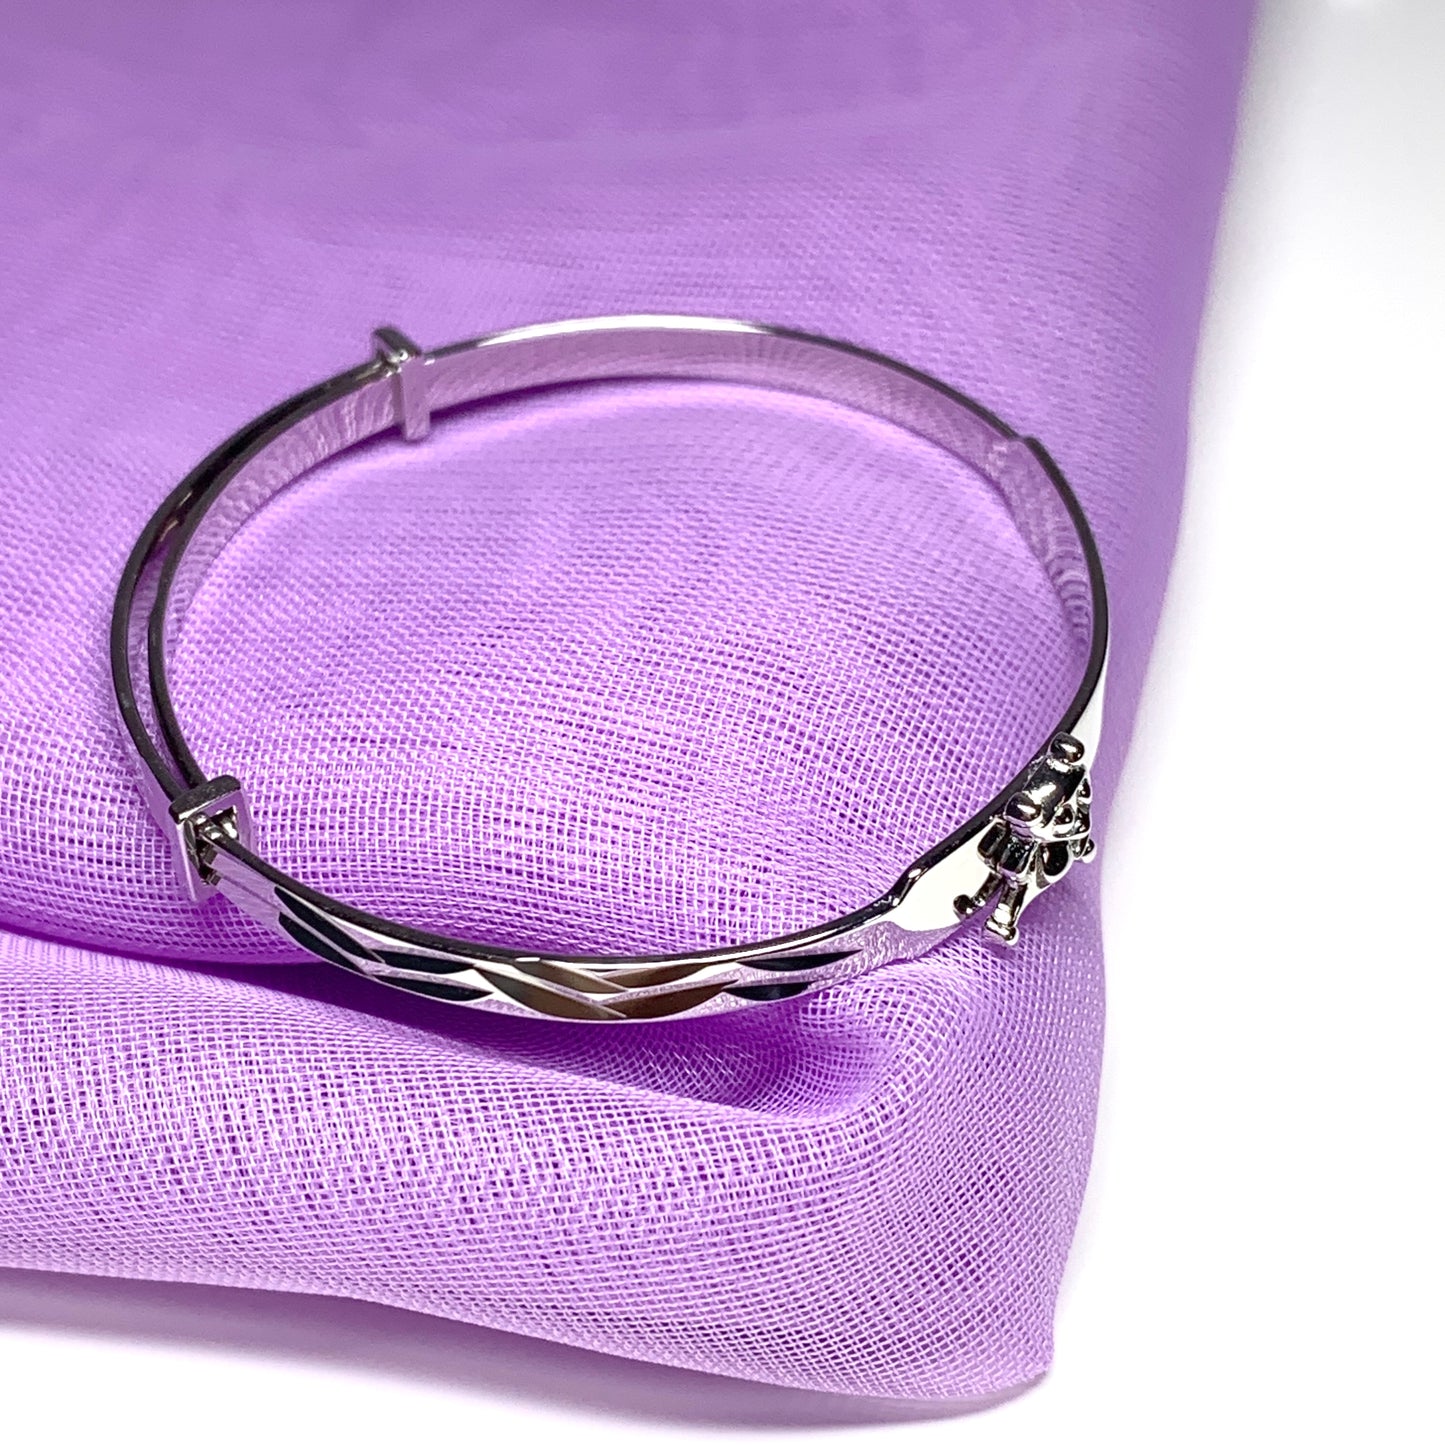 Child’s expanding bangle with a teddy bear design sterling silver